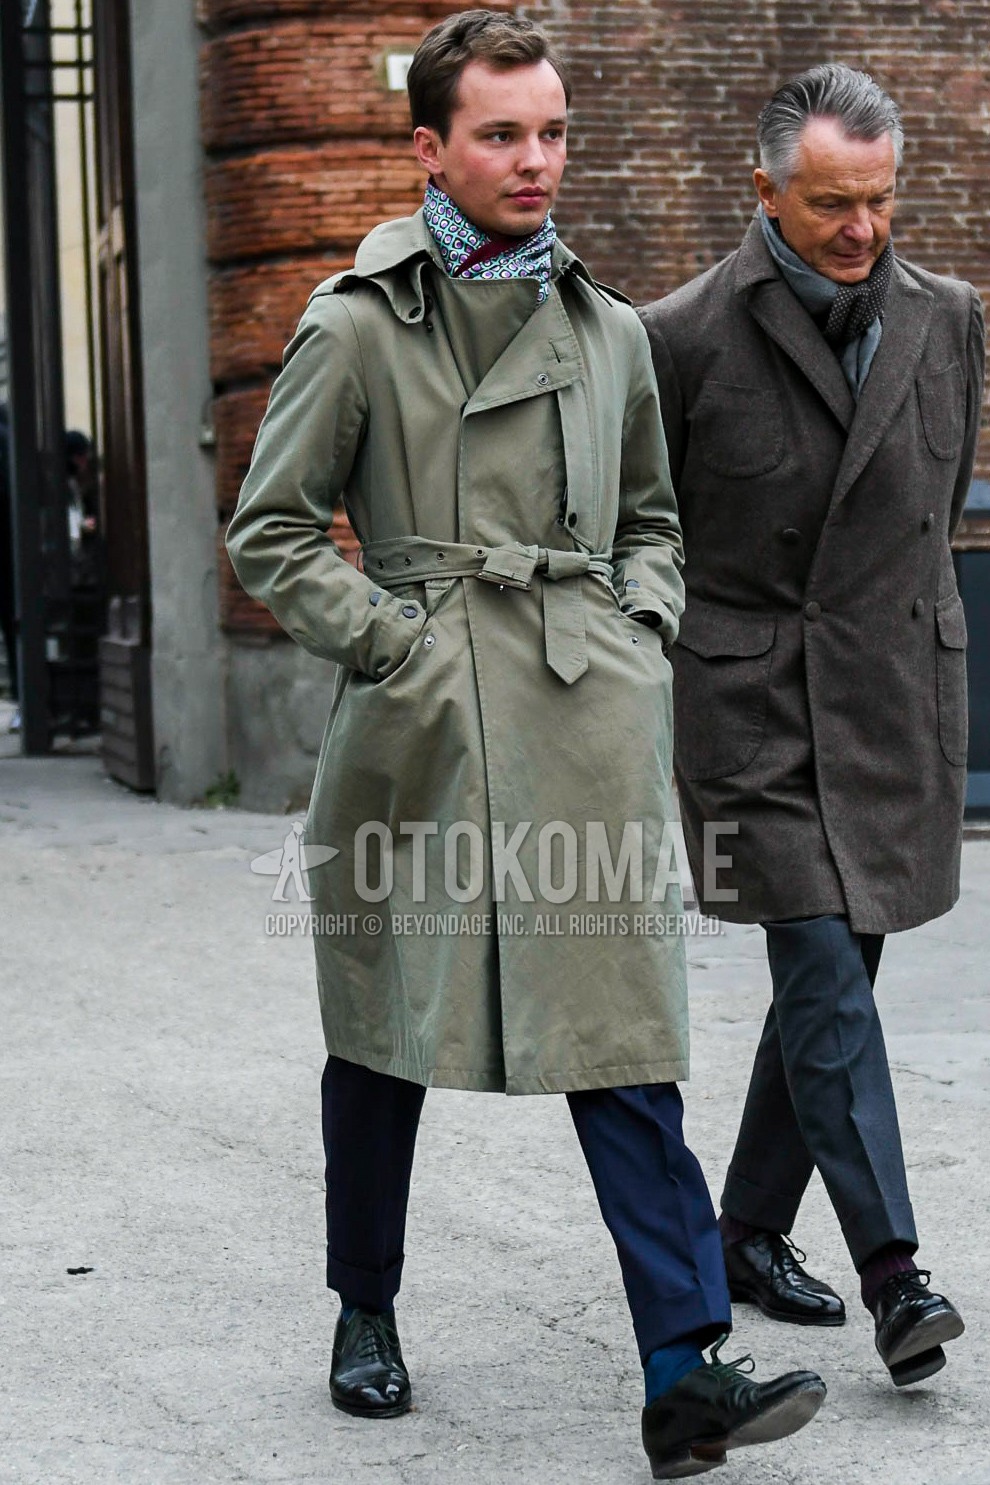 Men's autumn winter outfit with multi-color small crest scarf, olive green plain belted coat, olive green plain trench coat, gray plain slacks, gray plain socks, black plain toe leather shoes.